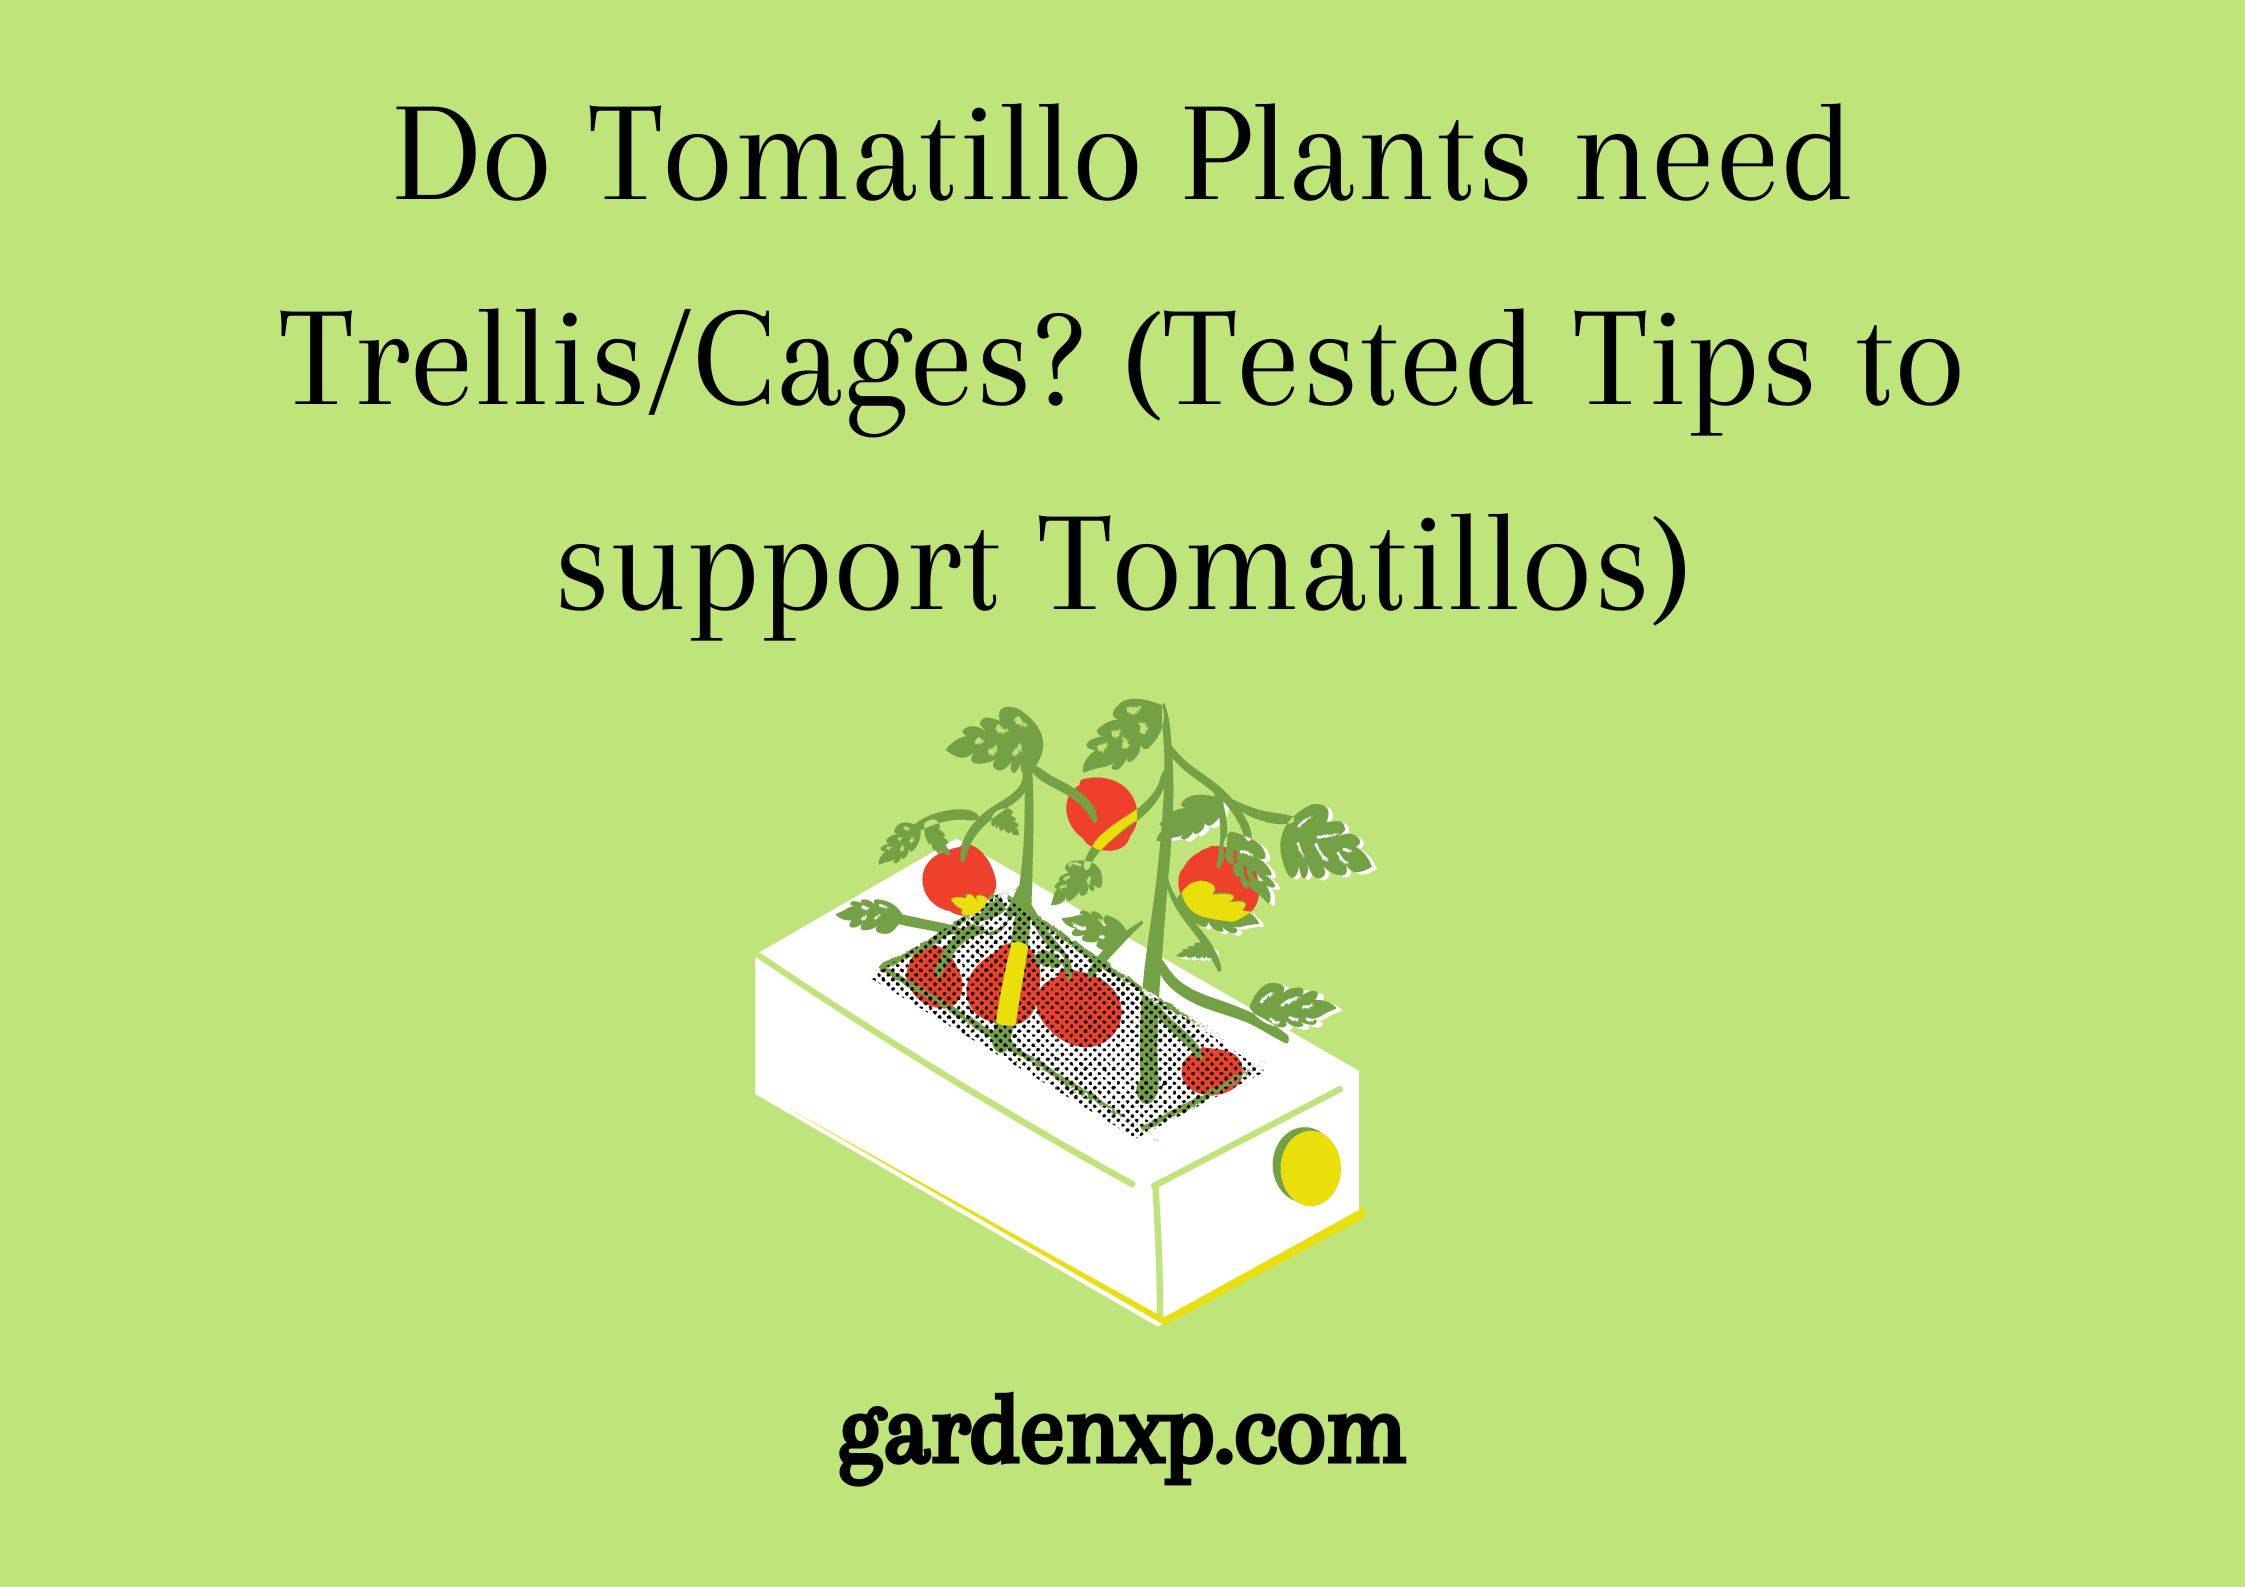 Do Tomatillo Plants need Trellis/Cages? (Tested Tips to support Tomatillos)